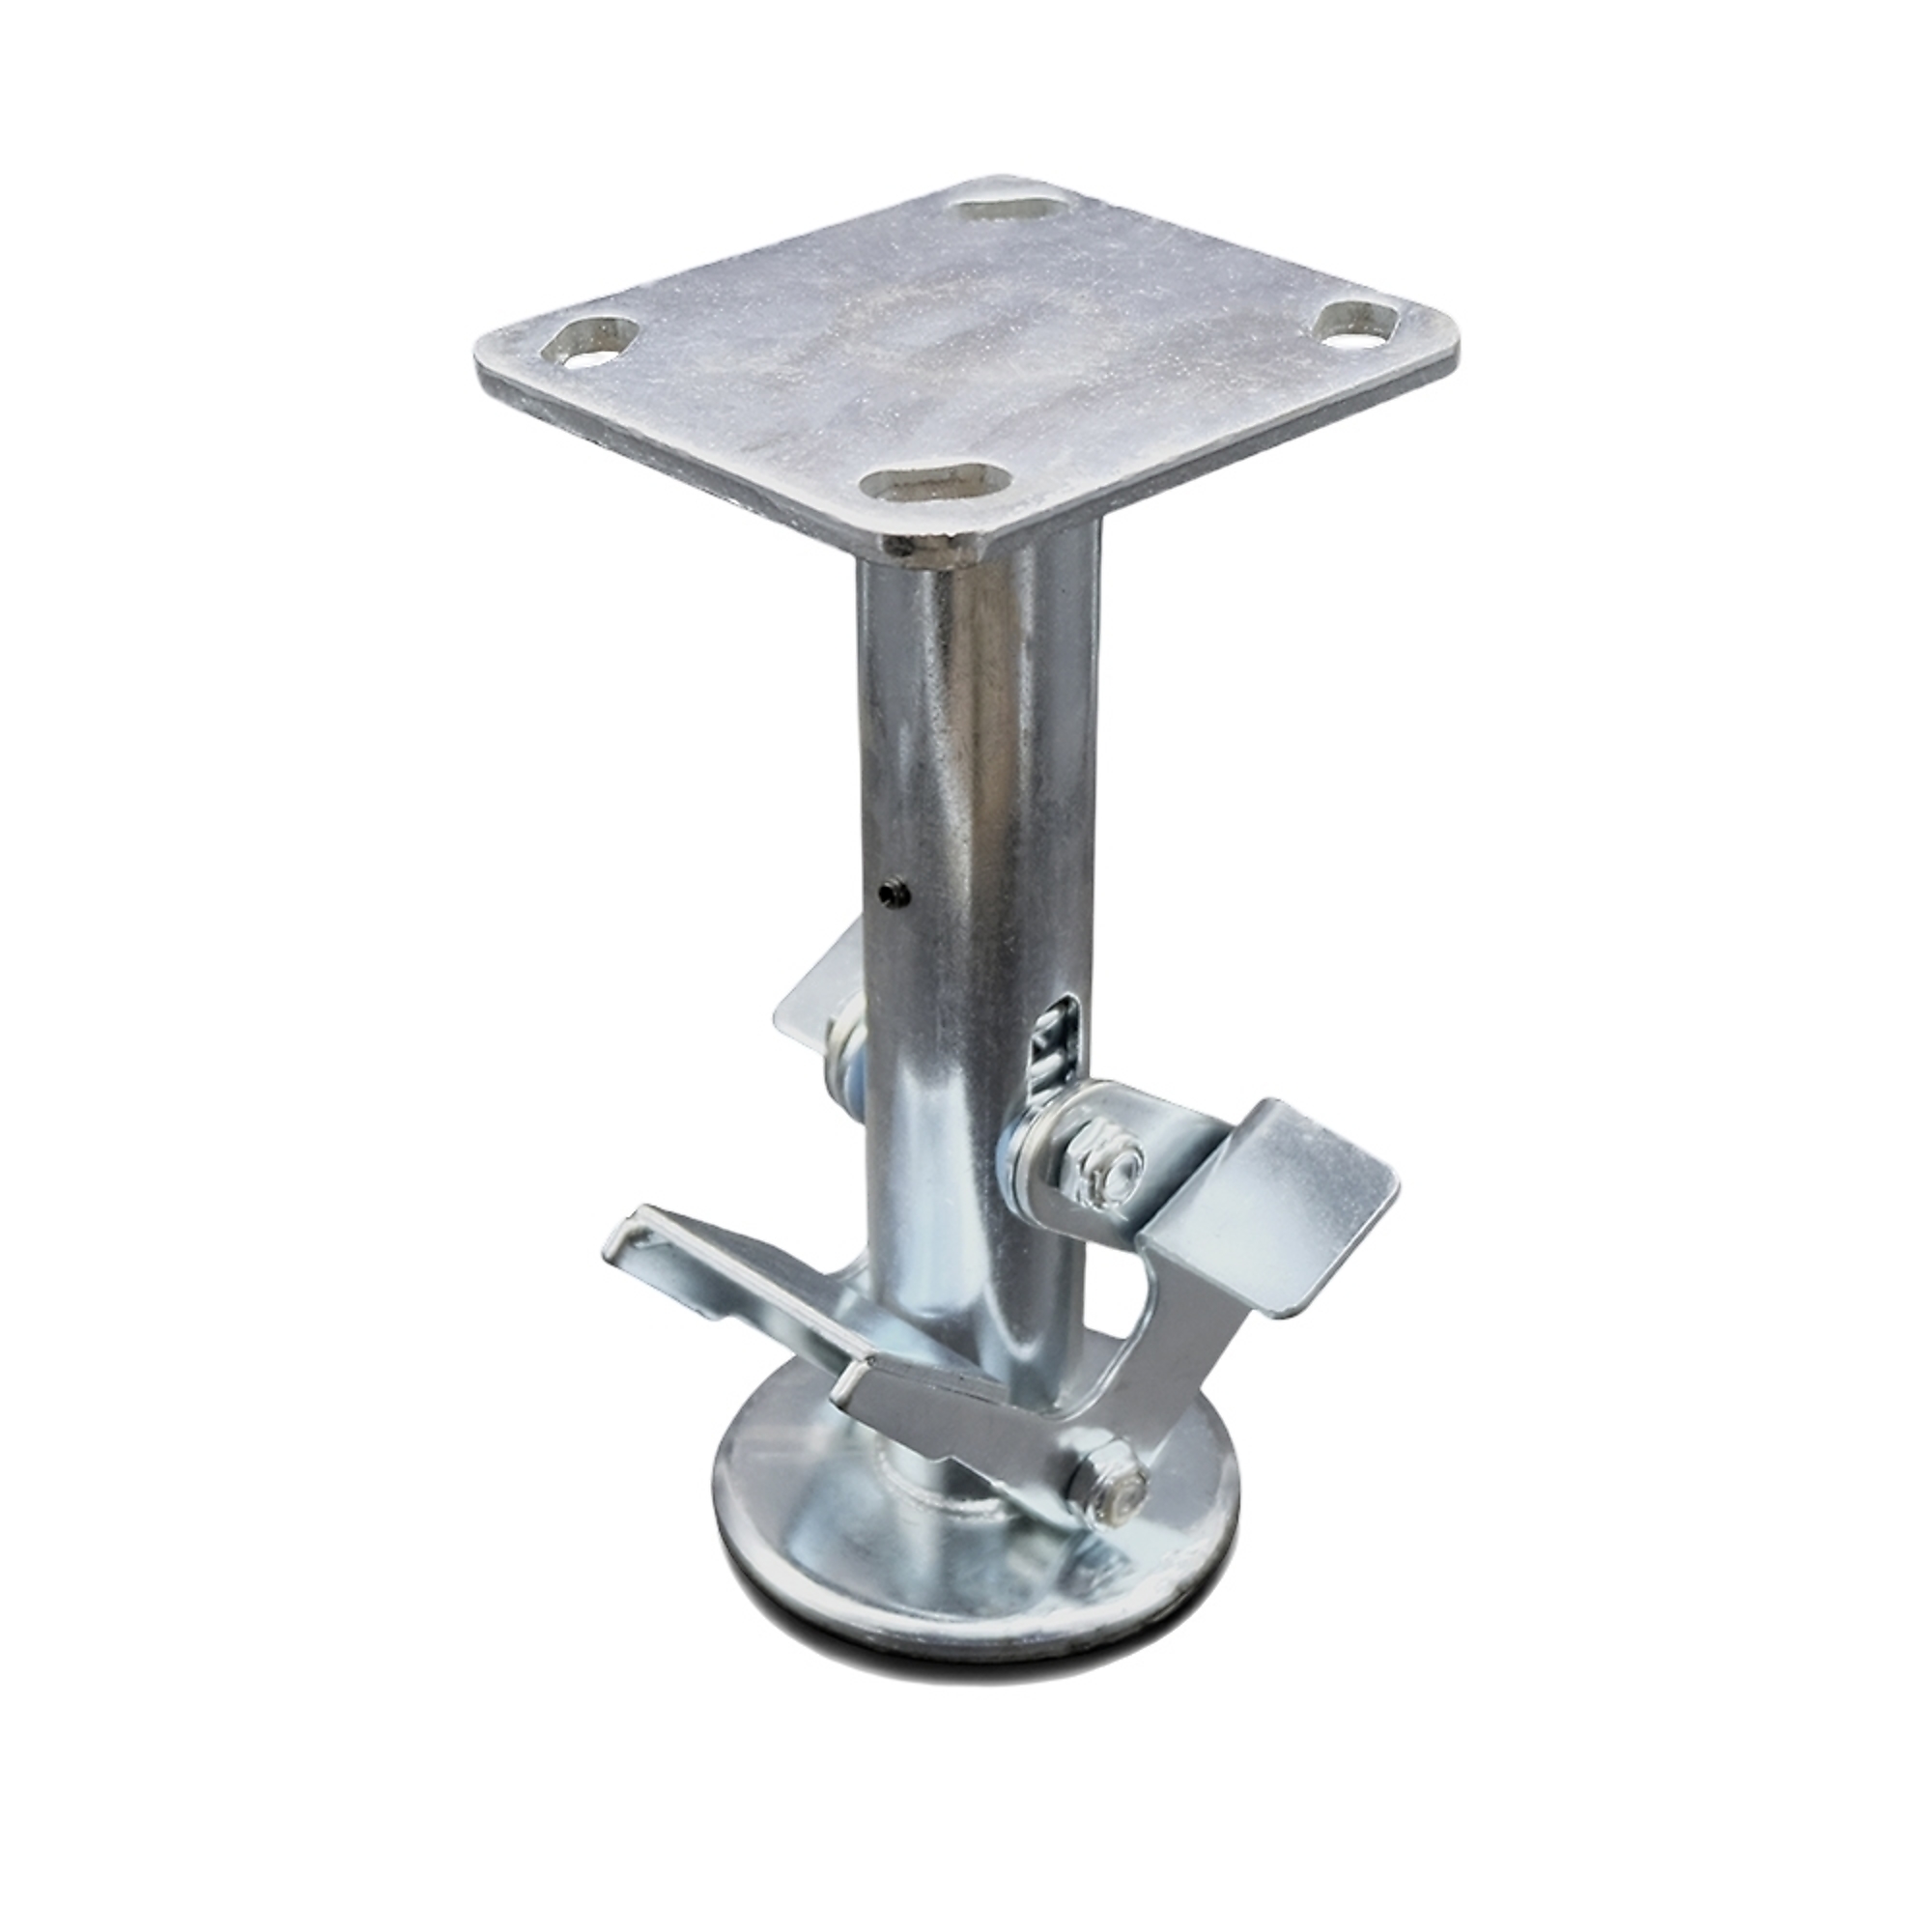 Service Caster, 8Inch Double Pedal Floor Truck Lock, Caster Type Rigid, Package (qty.) 1, Model SCC-FL800DP